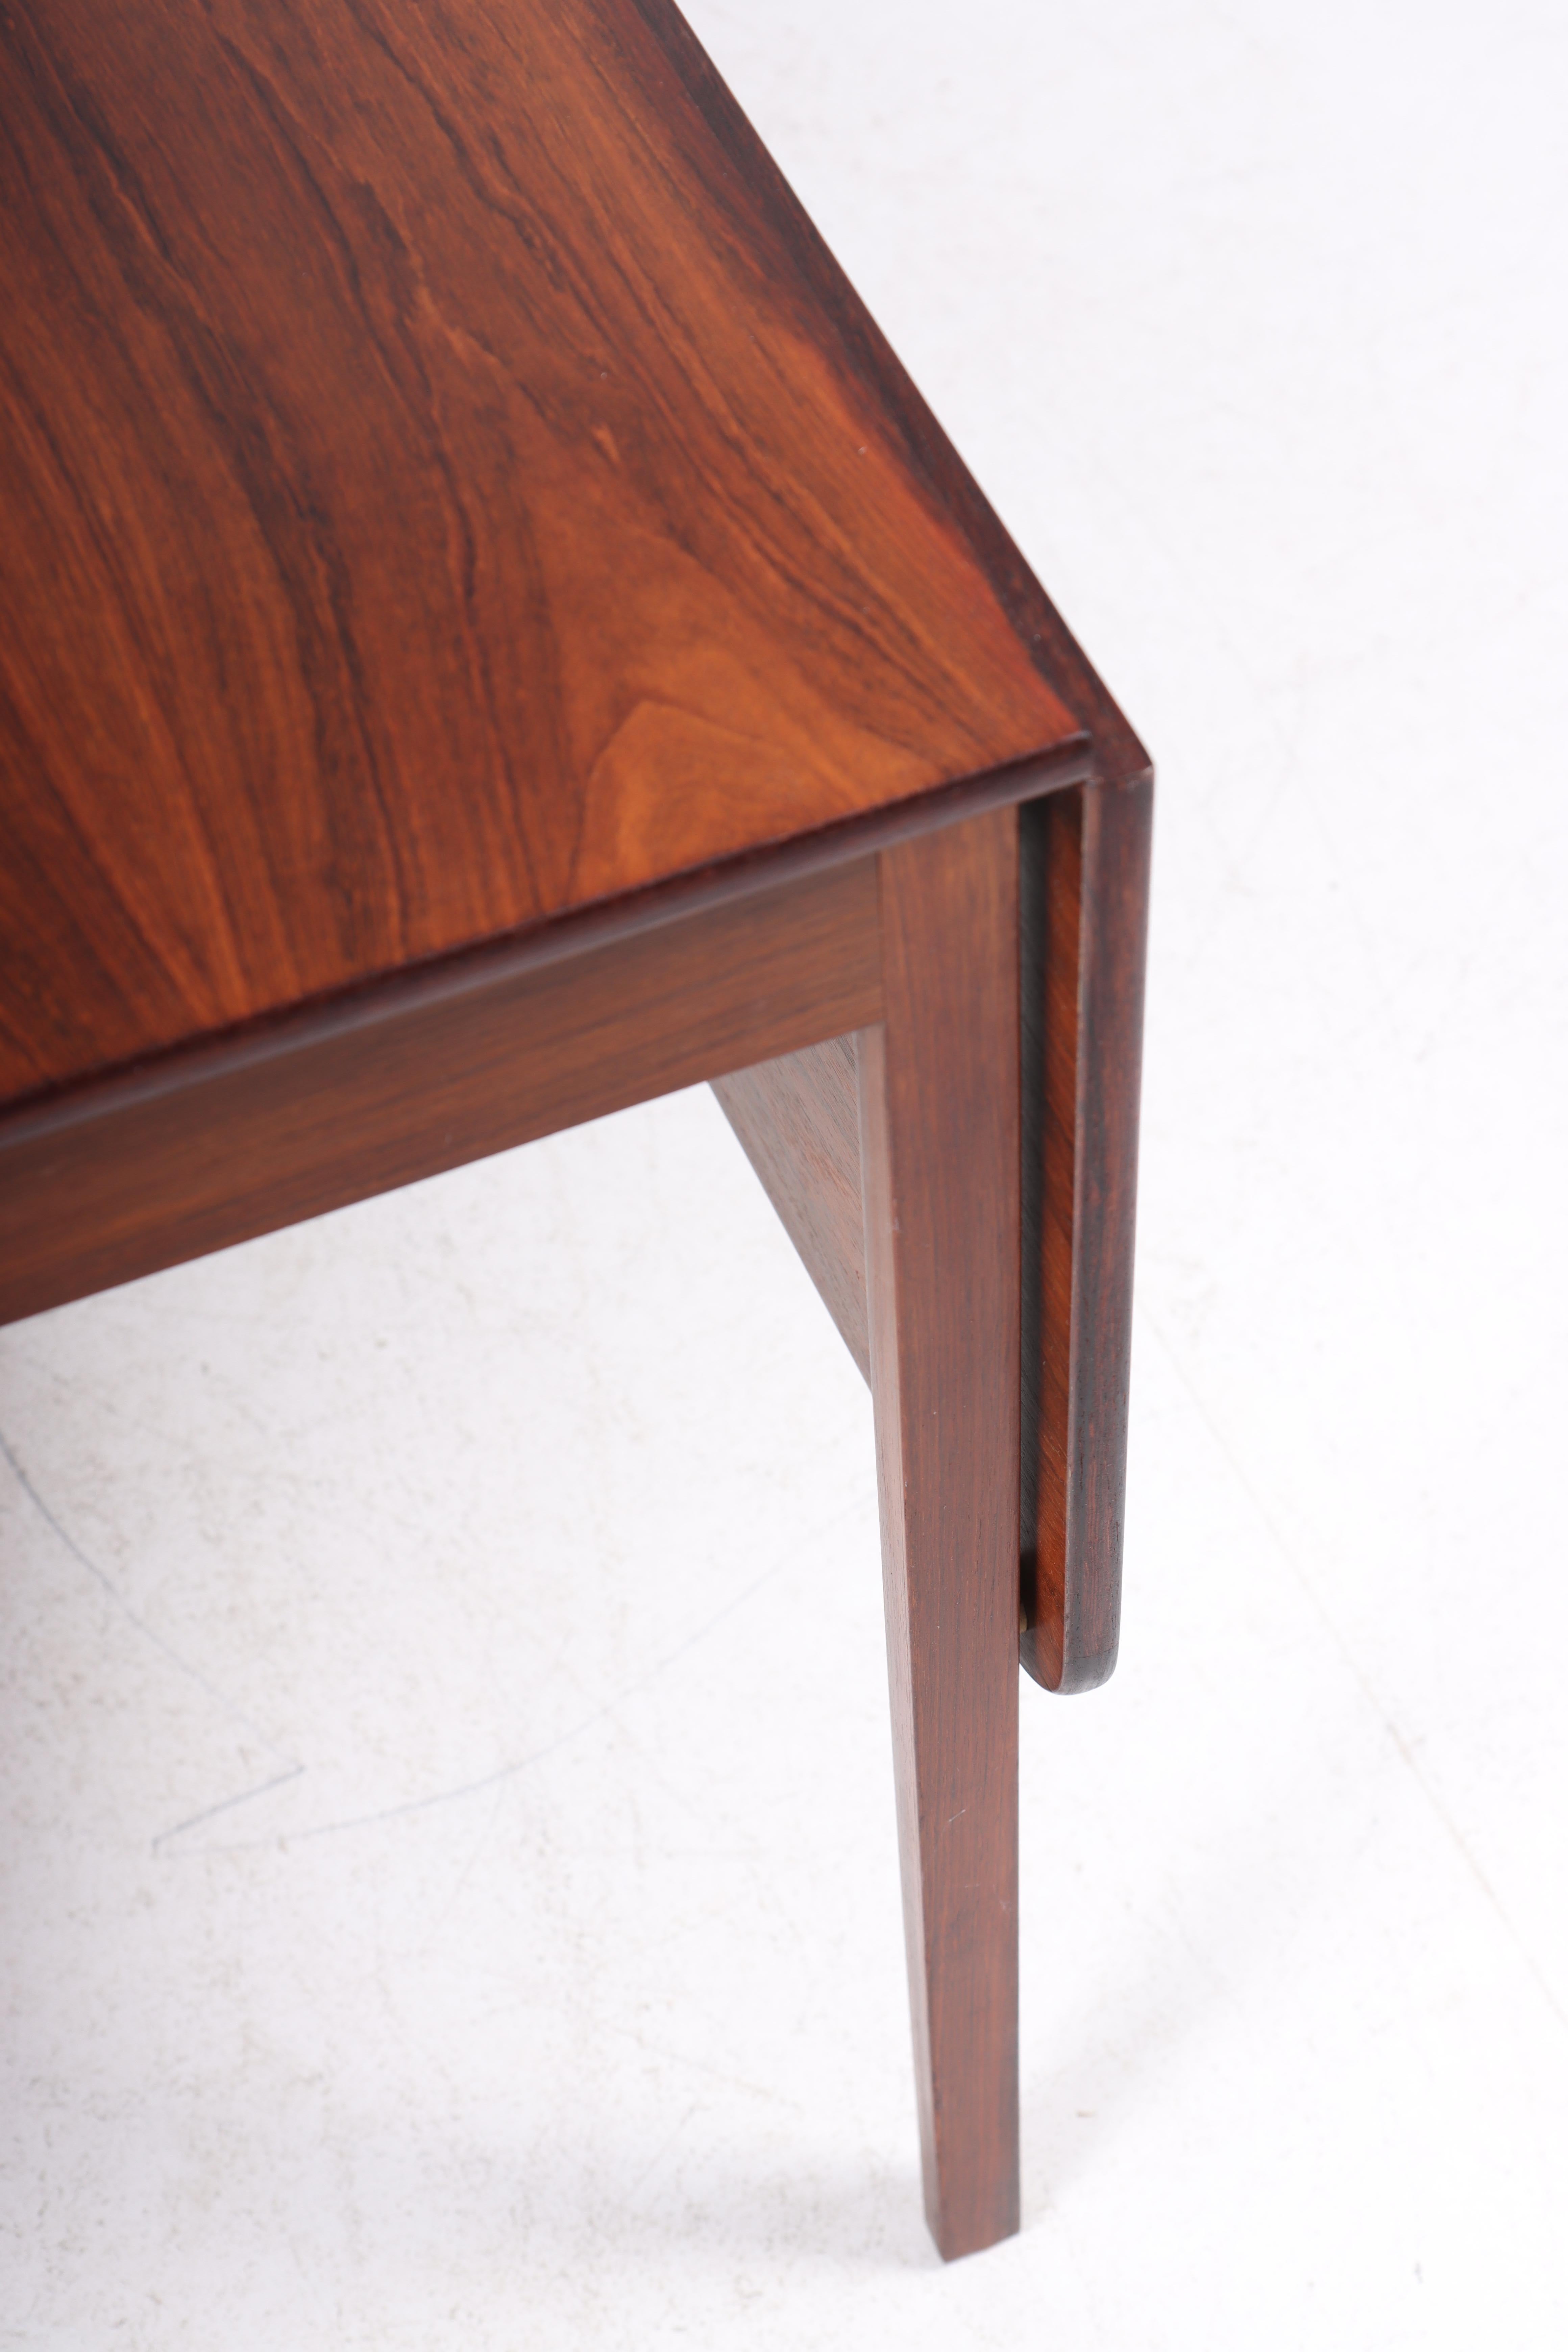 Scandinavian Modern Drop Leaf Dining Table in Rosewood by Ole Wanscher, 1960s